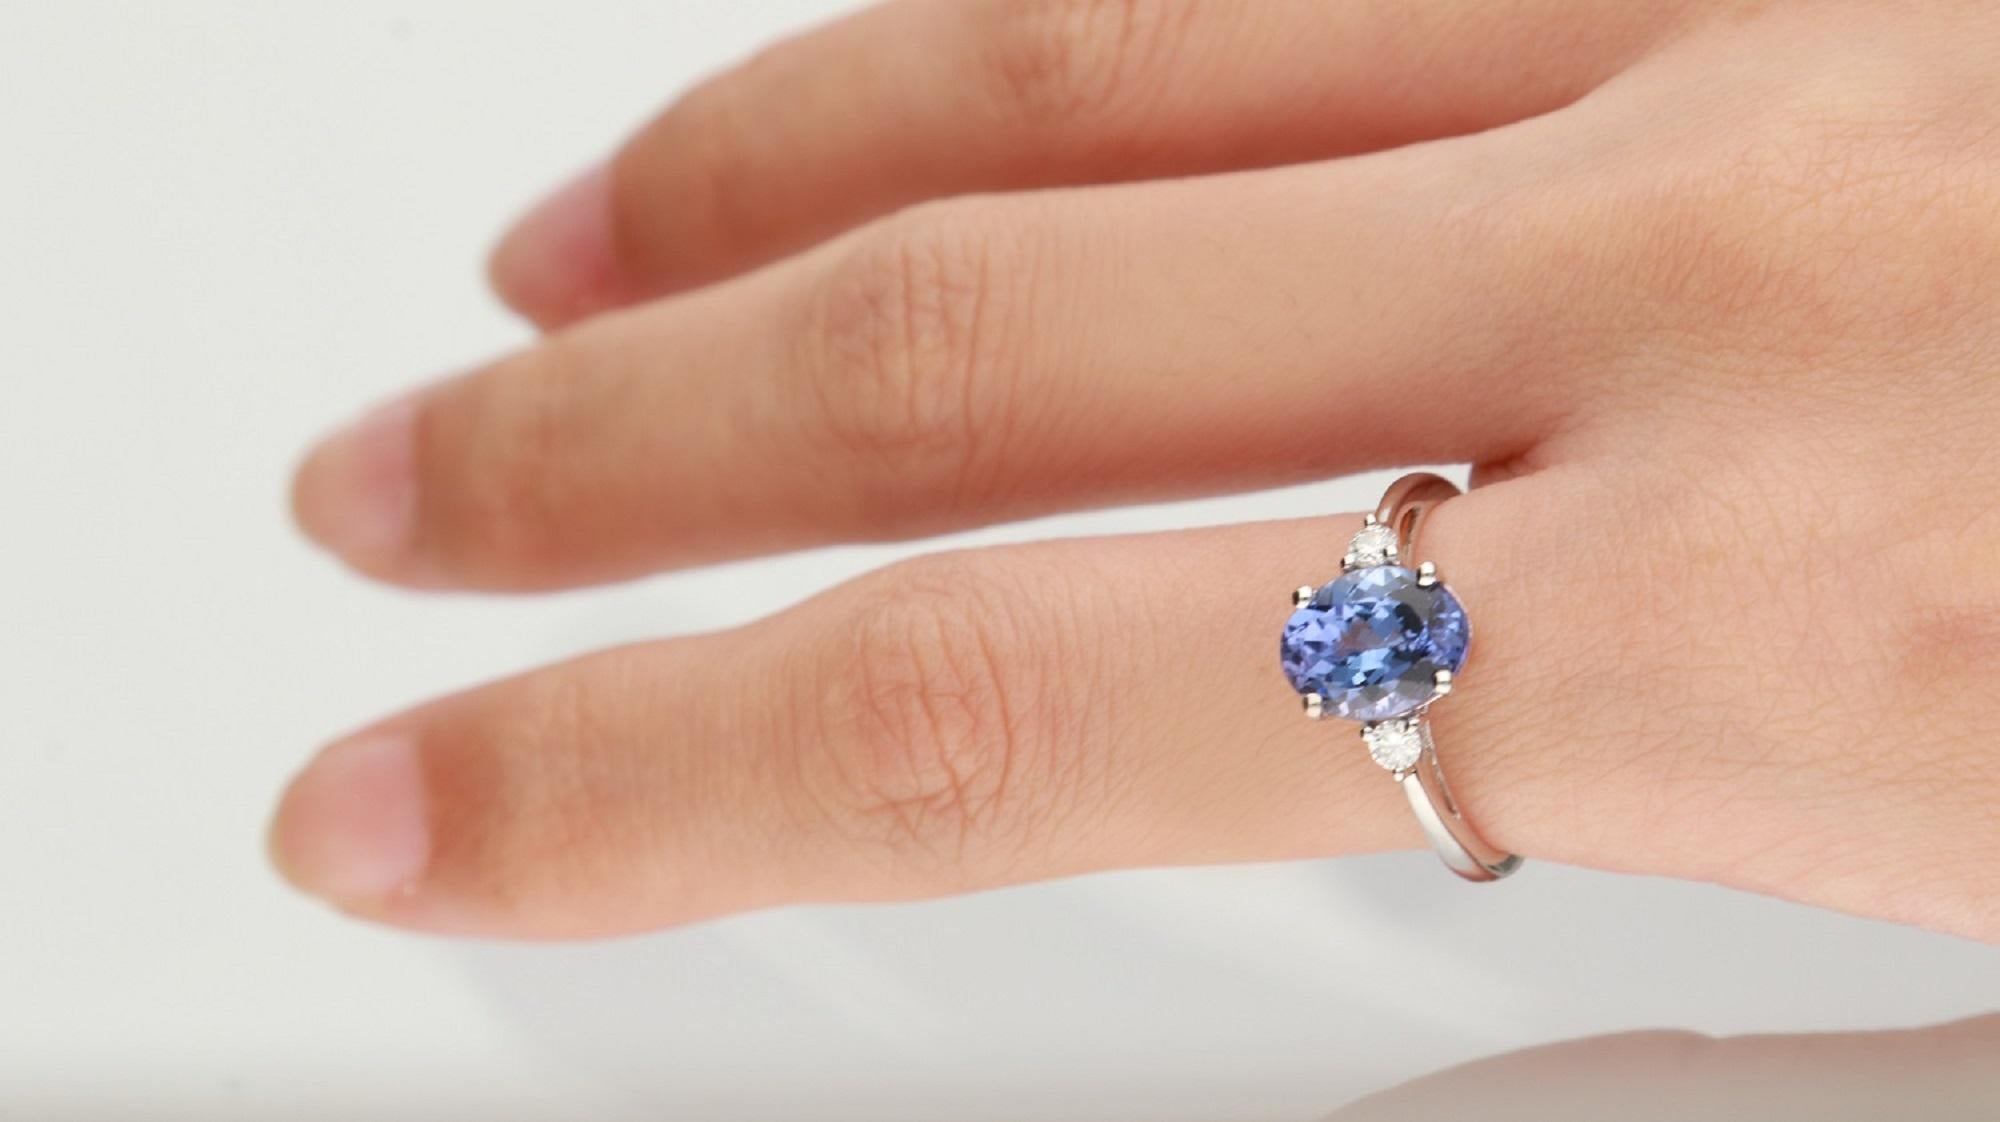 Stunning, timeless and classy eternity Unique Ring. Decorate yourself in luxury with this Gin & Grace Ring. The 14k White Gold jewelry boasts Oval-Cut Prong Setting Genuine Tanzanite (1 pcs) 2.15 Carat, along with Natural Round cut white Diamond (2